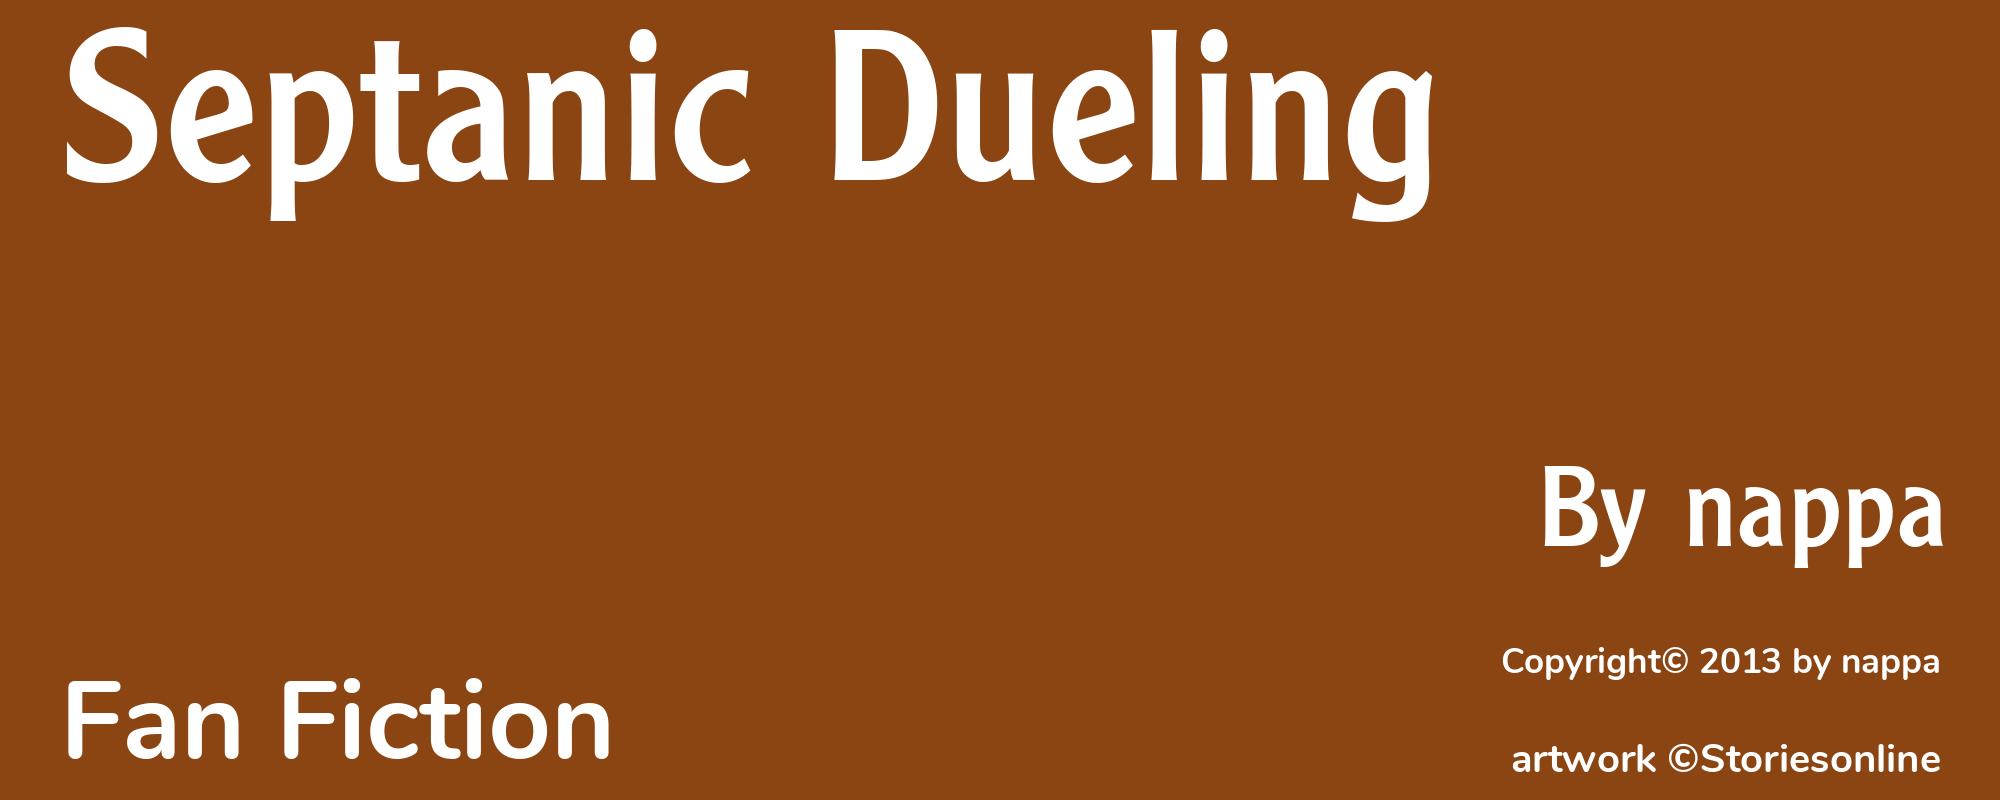 Septanic Dueling - Cover